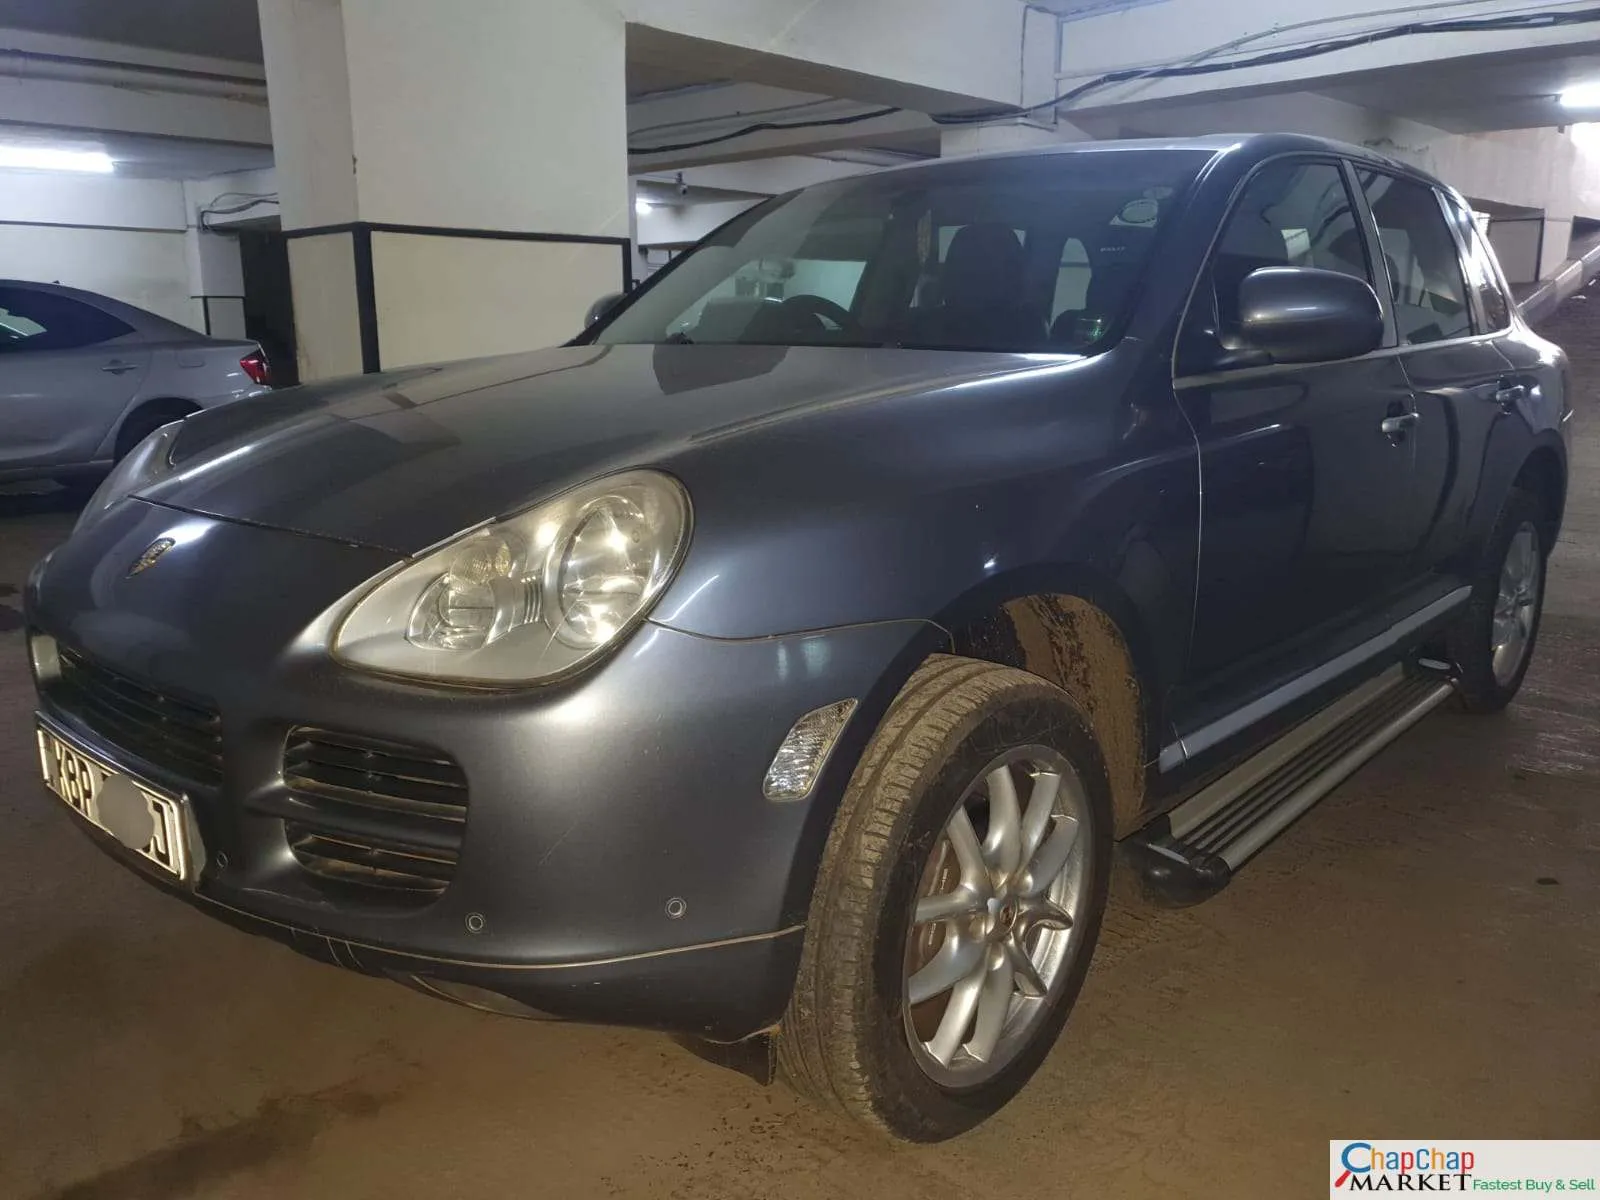 Cars Cars For Sale-Porsche Cayenne You PAY 40% DEPOSIT Trade in OK cayenne for sale in kenya hire purchase installments EXCLUSIVE 8